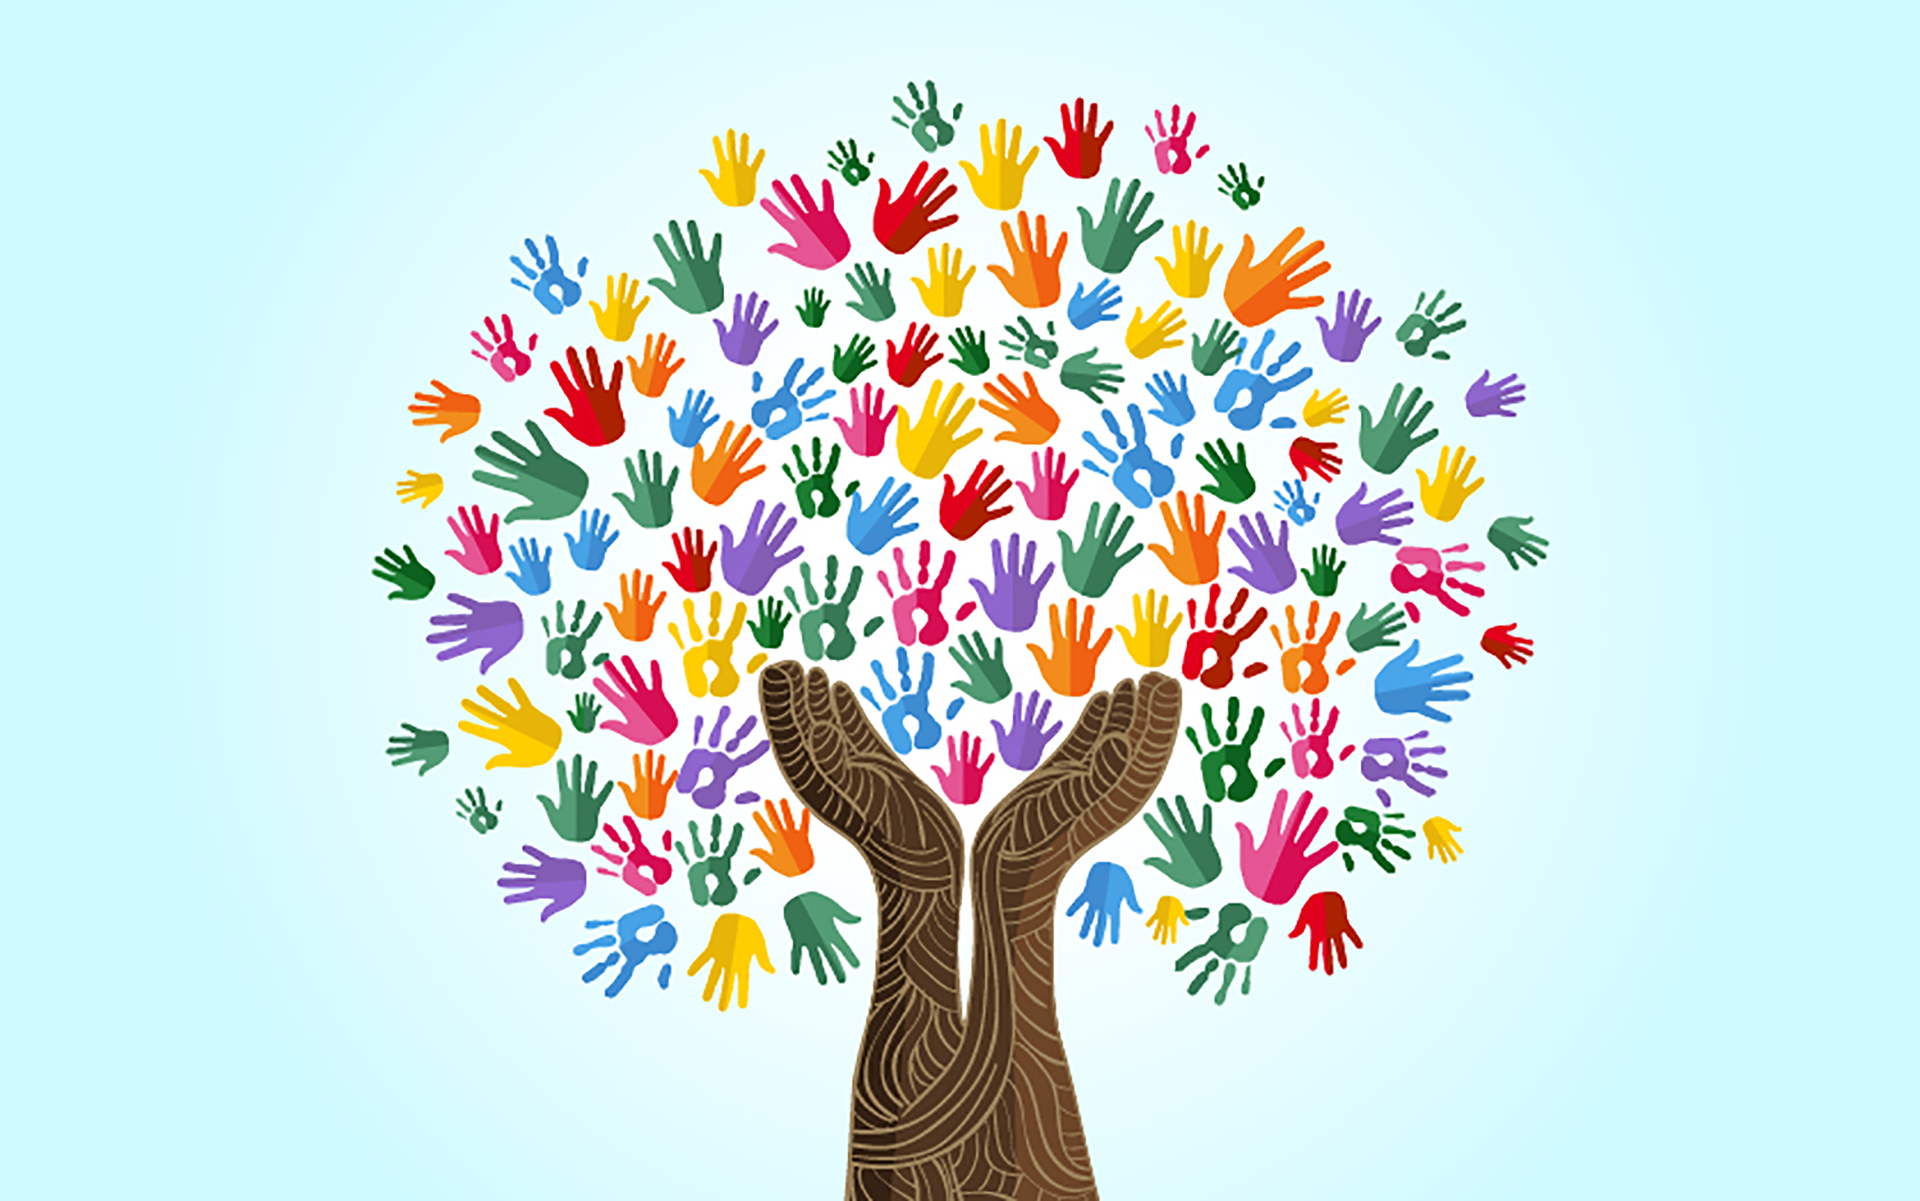 Illustration of a tree where the trunk is made of two brown arms and hands reaching upward and the leaves are small, colorful handprints with a blue background.